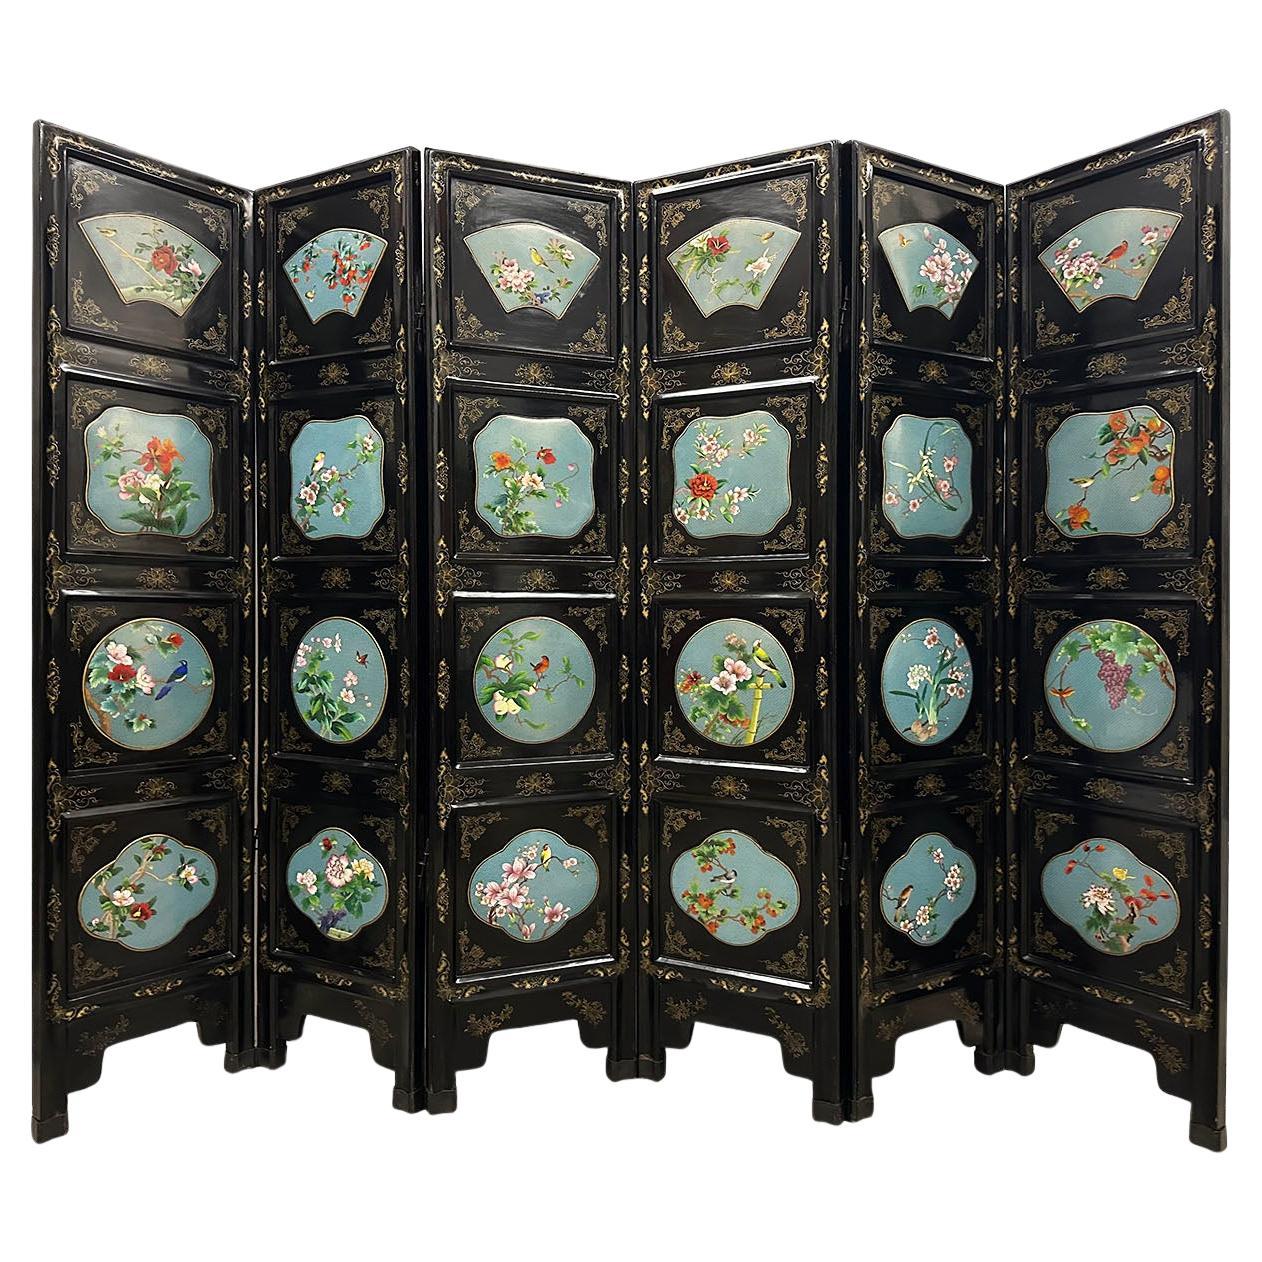 Early 20th Century Chinese Folding Screen/Room Divider with Cloisonne panels For Sale